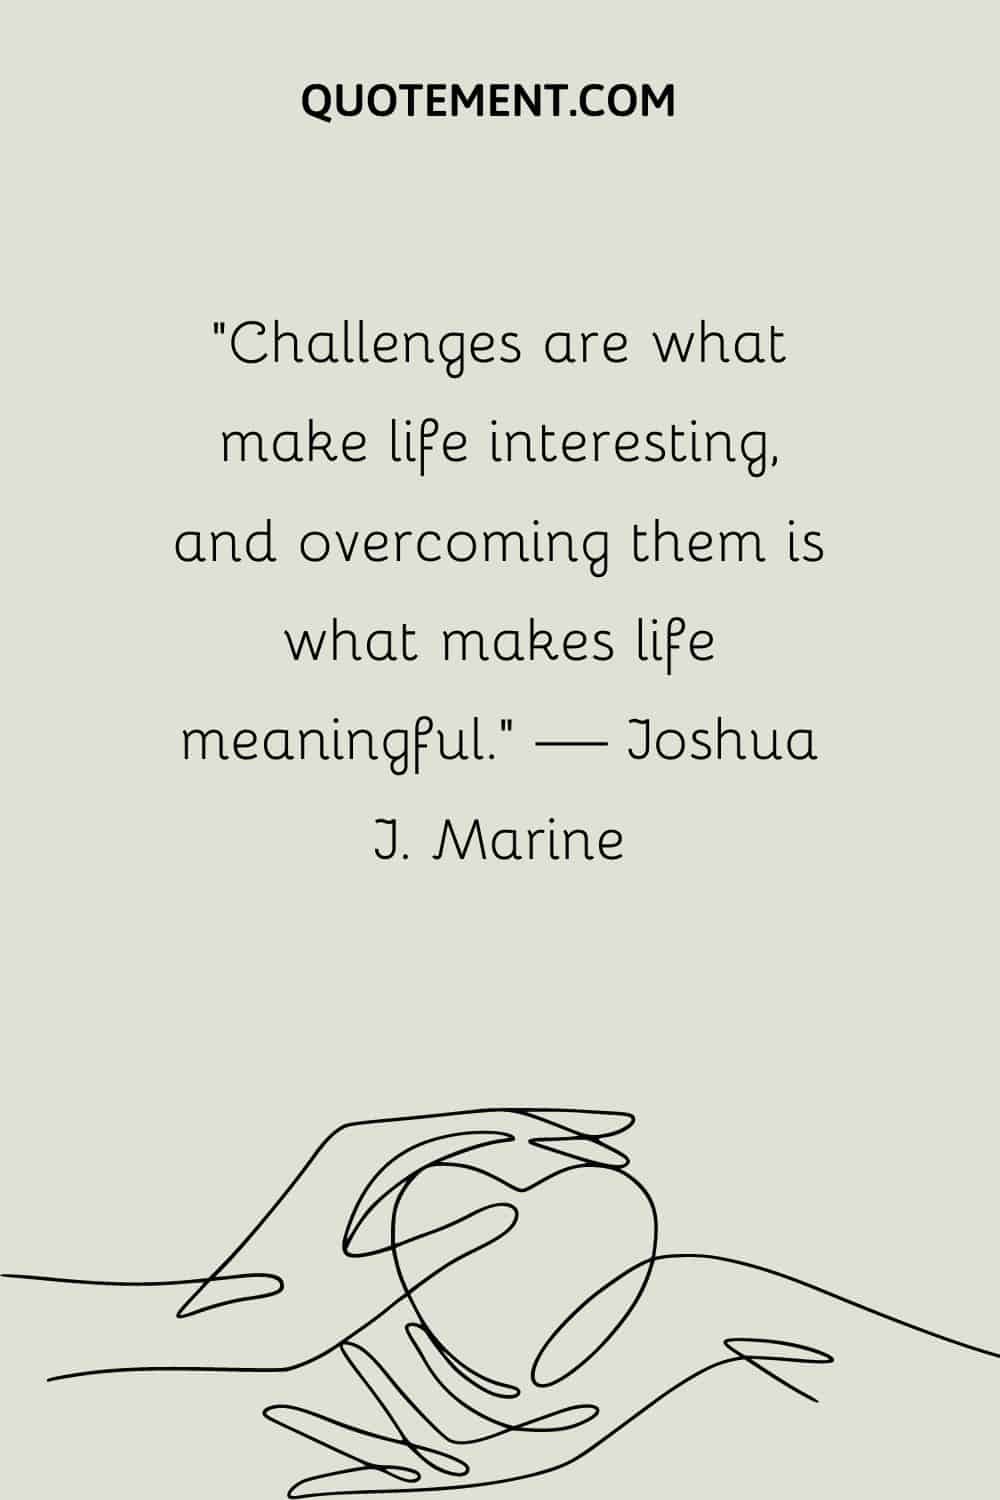 “Challenges are what make life interesting, and overcoming them is what makes life meaningful.” — Joshua J. Marine